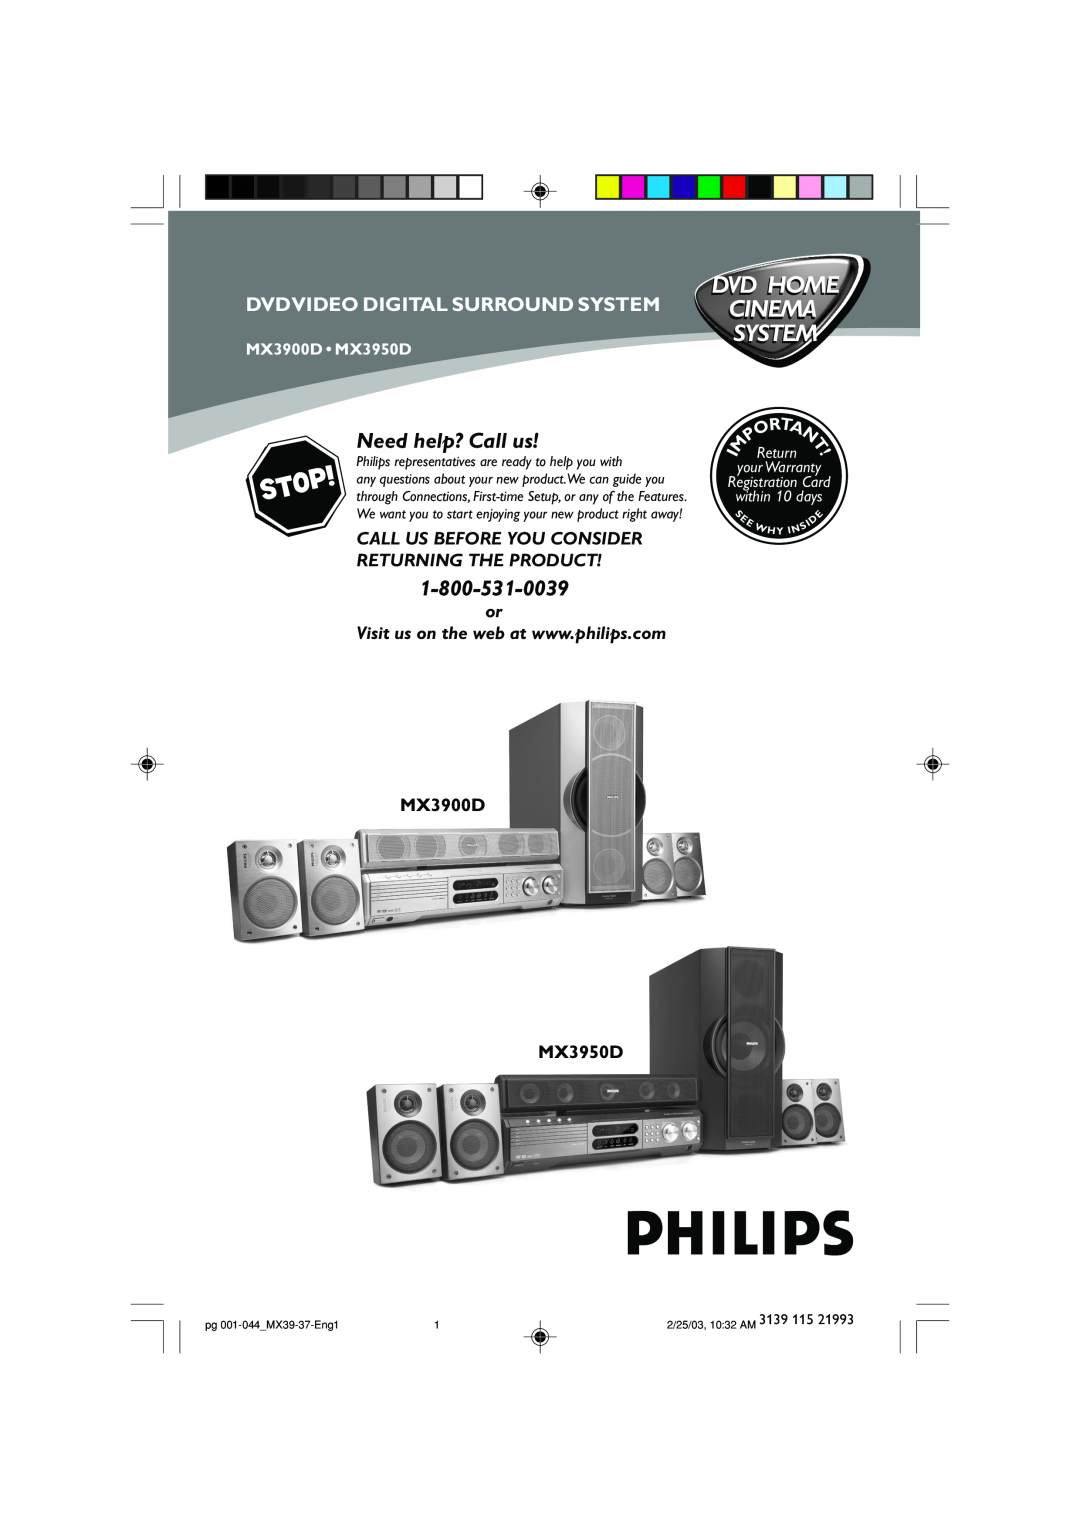 Philips warranty Need help? Call us, MX3900D MX3950D, Dvd Home Cinema System, Dvdvideo Digital Surround System, Return 